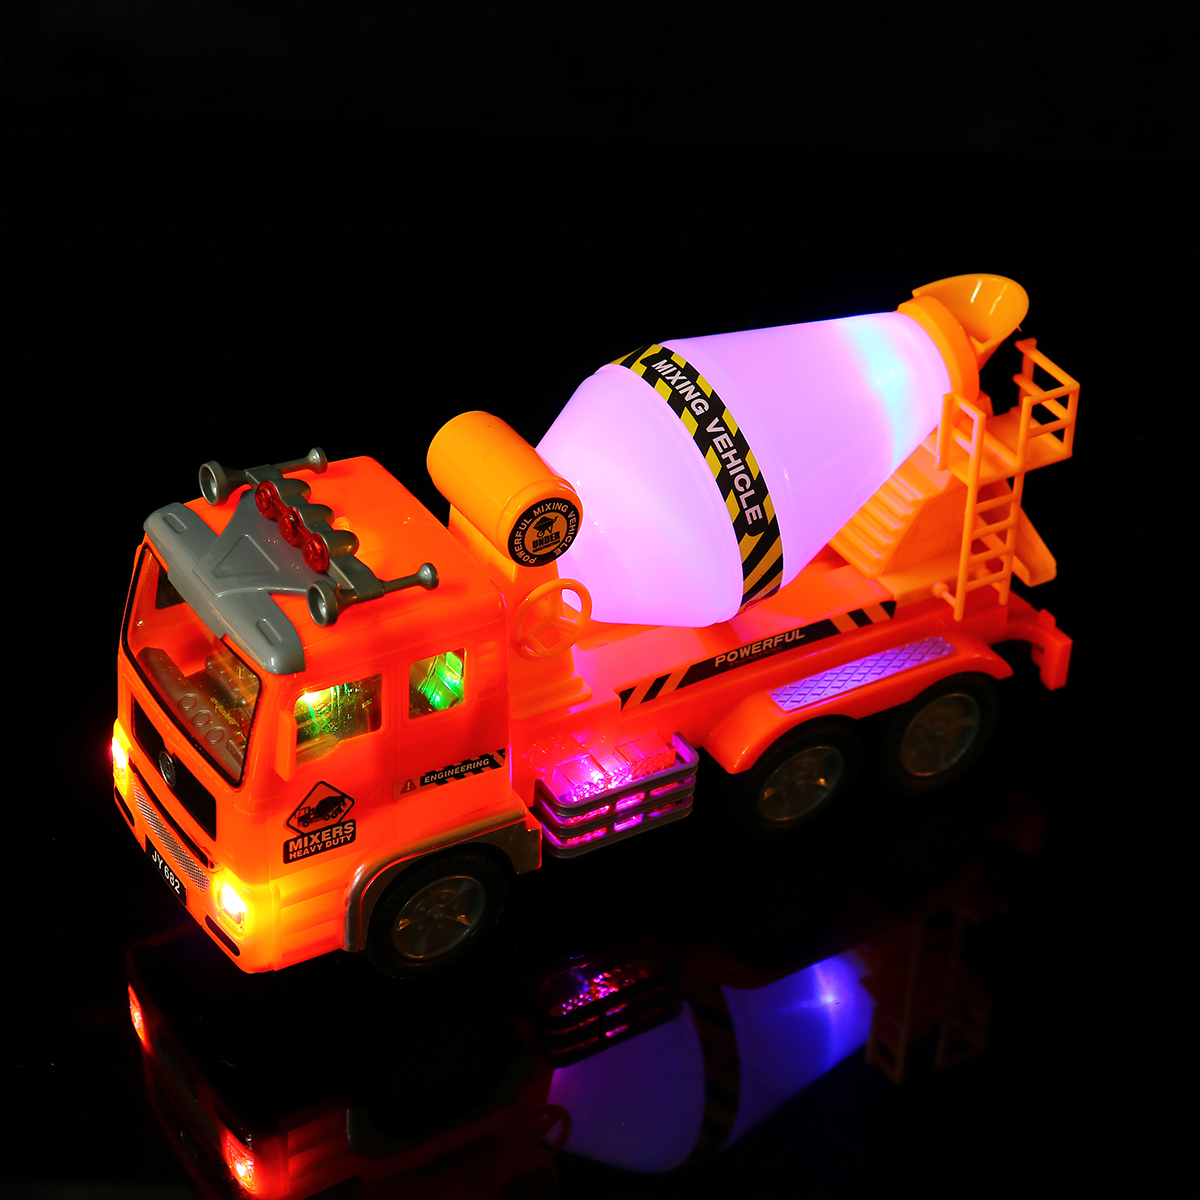 Large-Simulation-Electric-Car-Universal-Engineering-Vehicle-Toy-4D-Light-Music-Childrens-Toy-Car-1773426-18